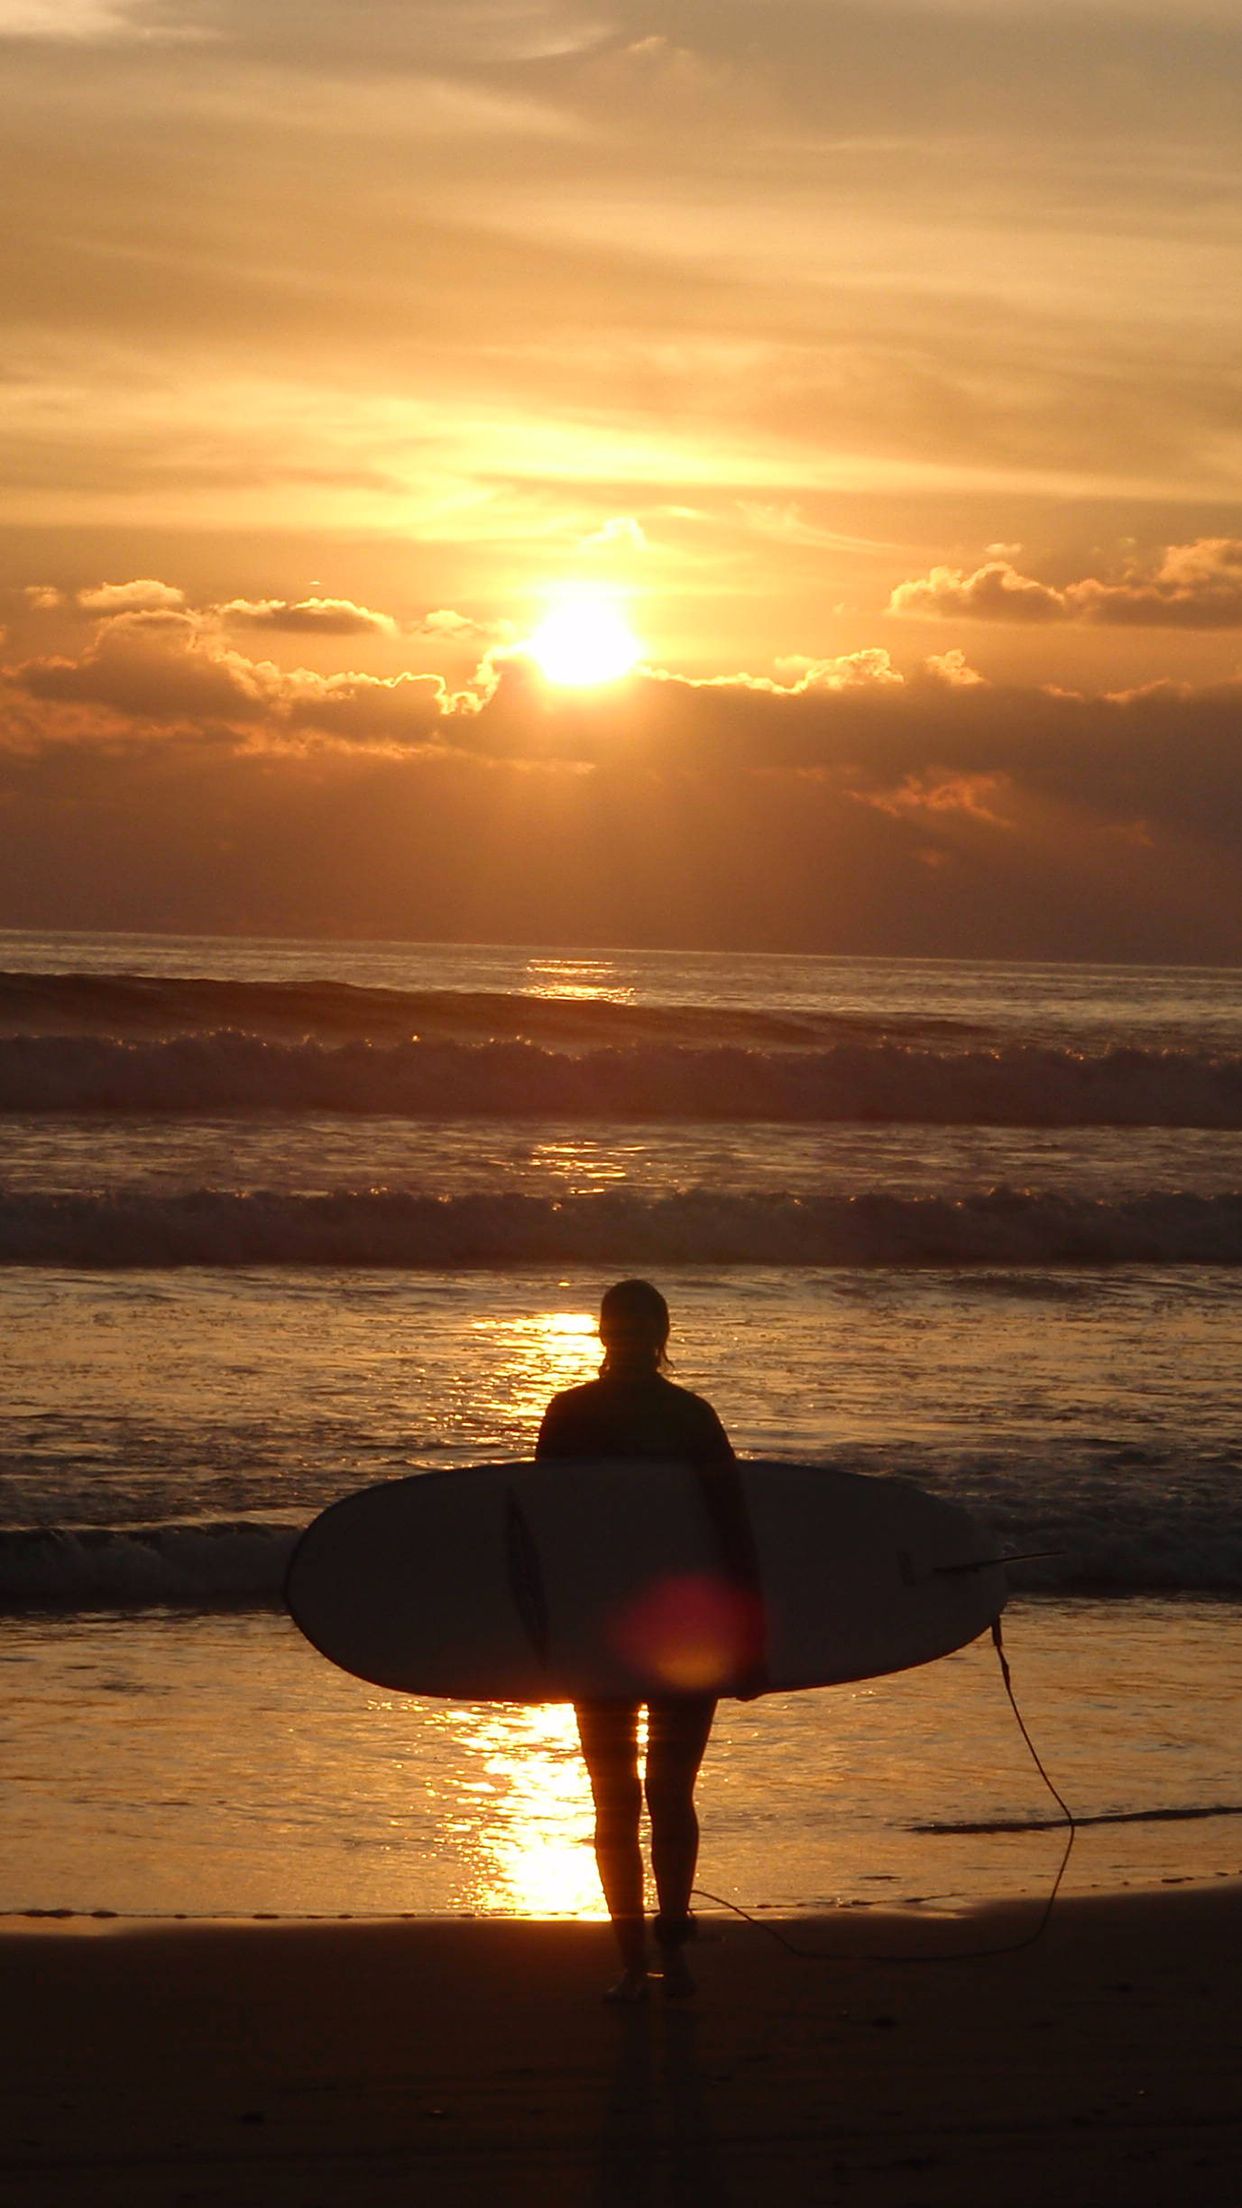 Surfing Sunset Wallpaper for iPhone Pro Max, X, 6